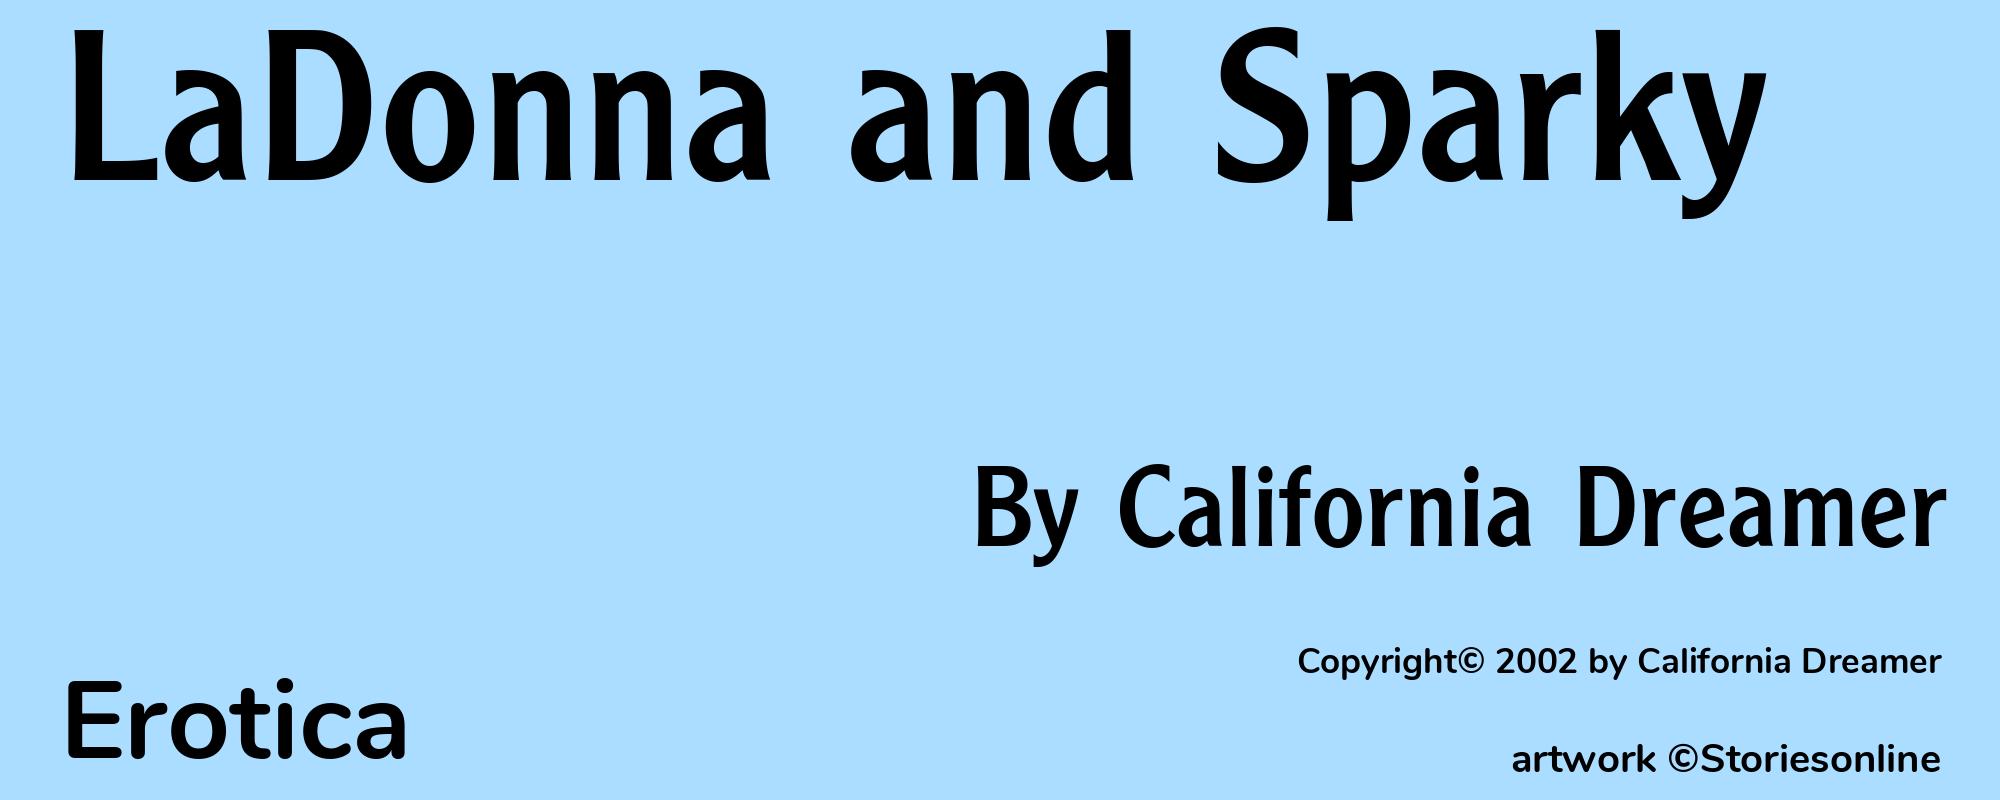 LaDonna and Sparky - Cover